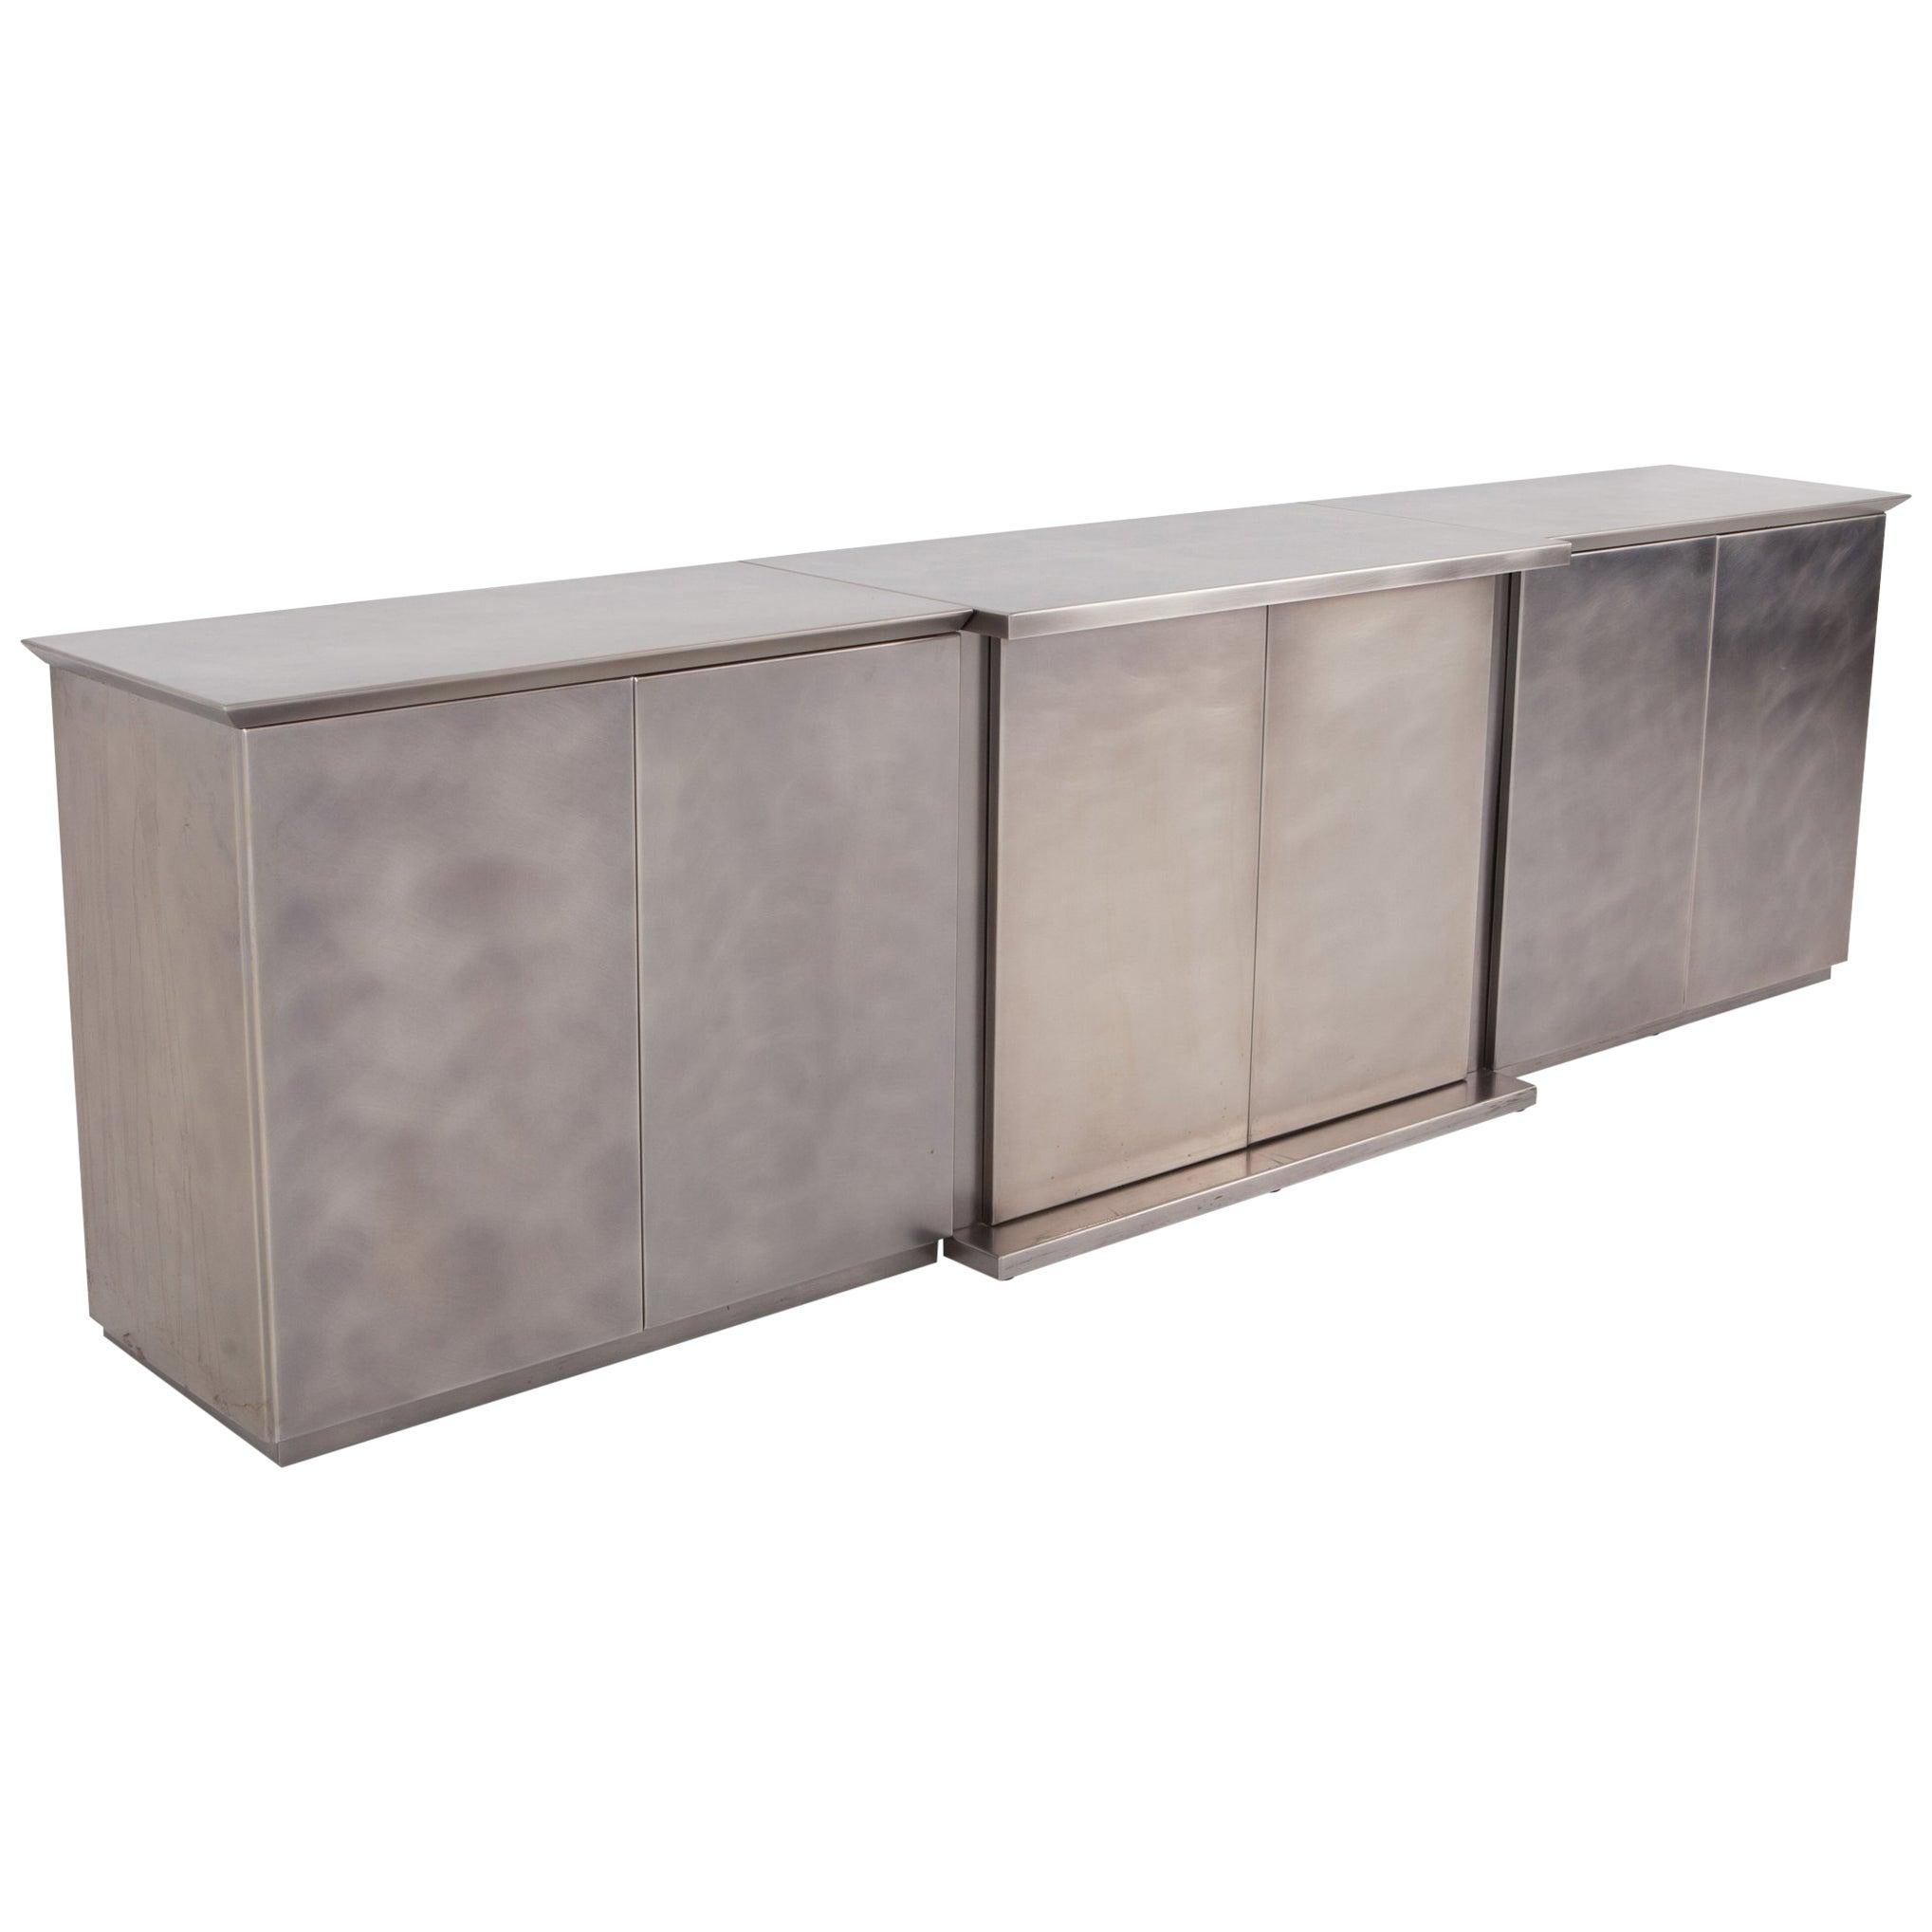 Maison Jansen style Credenza in Brushed Stainless Steel, 1980s